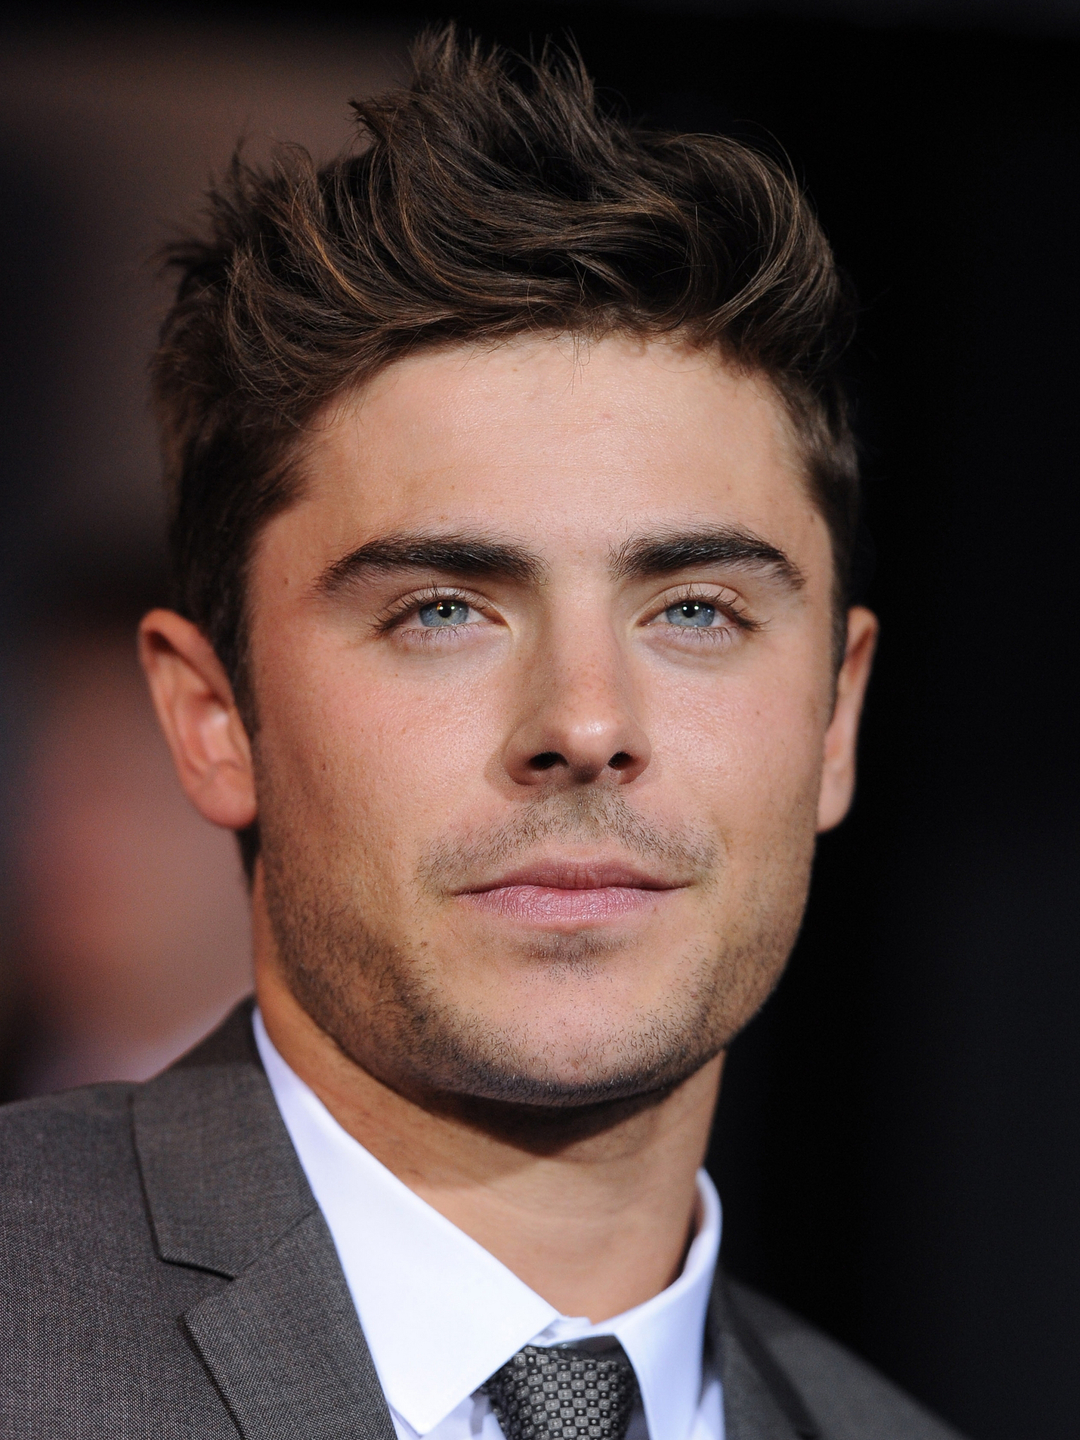 Zac Efron story of success